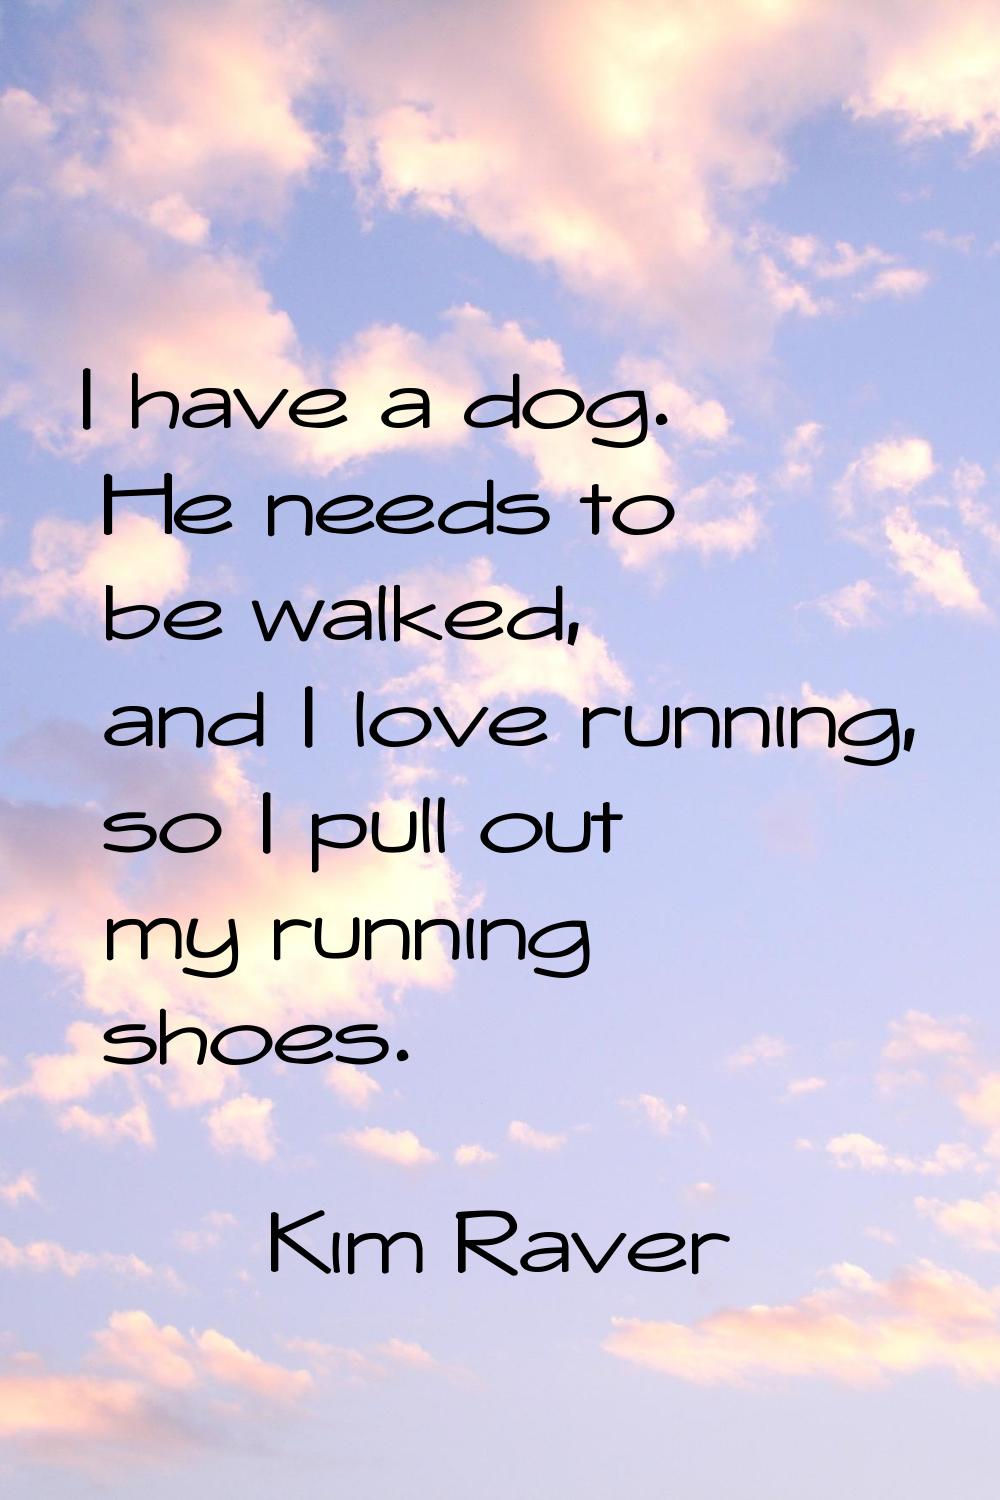 I have a dog. He needs to be walked, and I love running, so I pull out my running shoes.